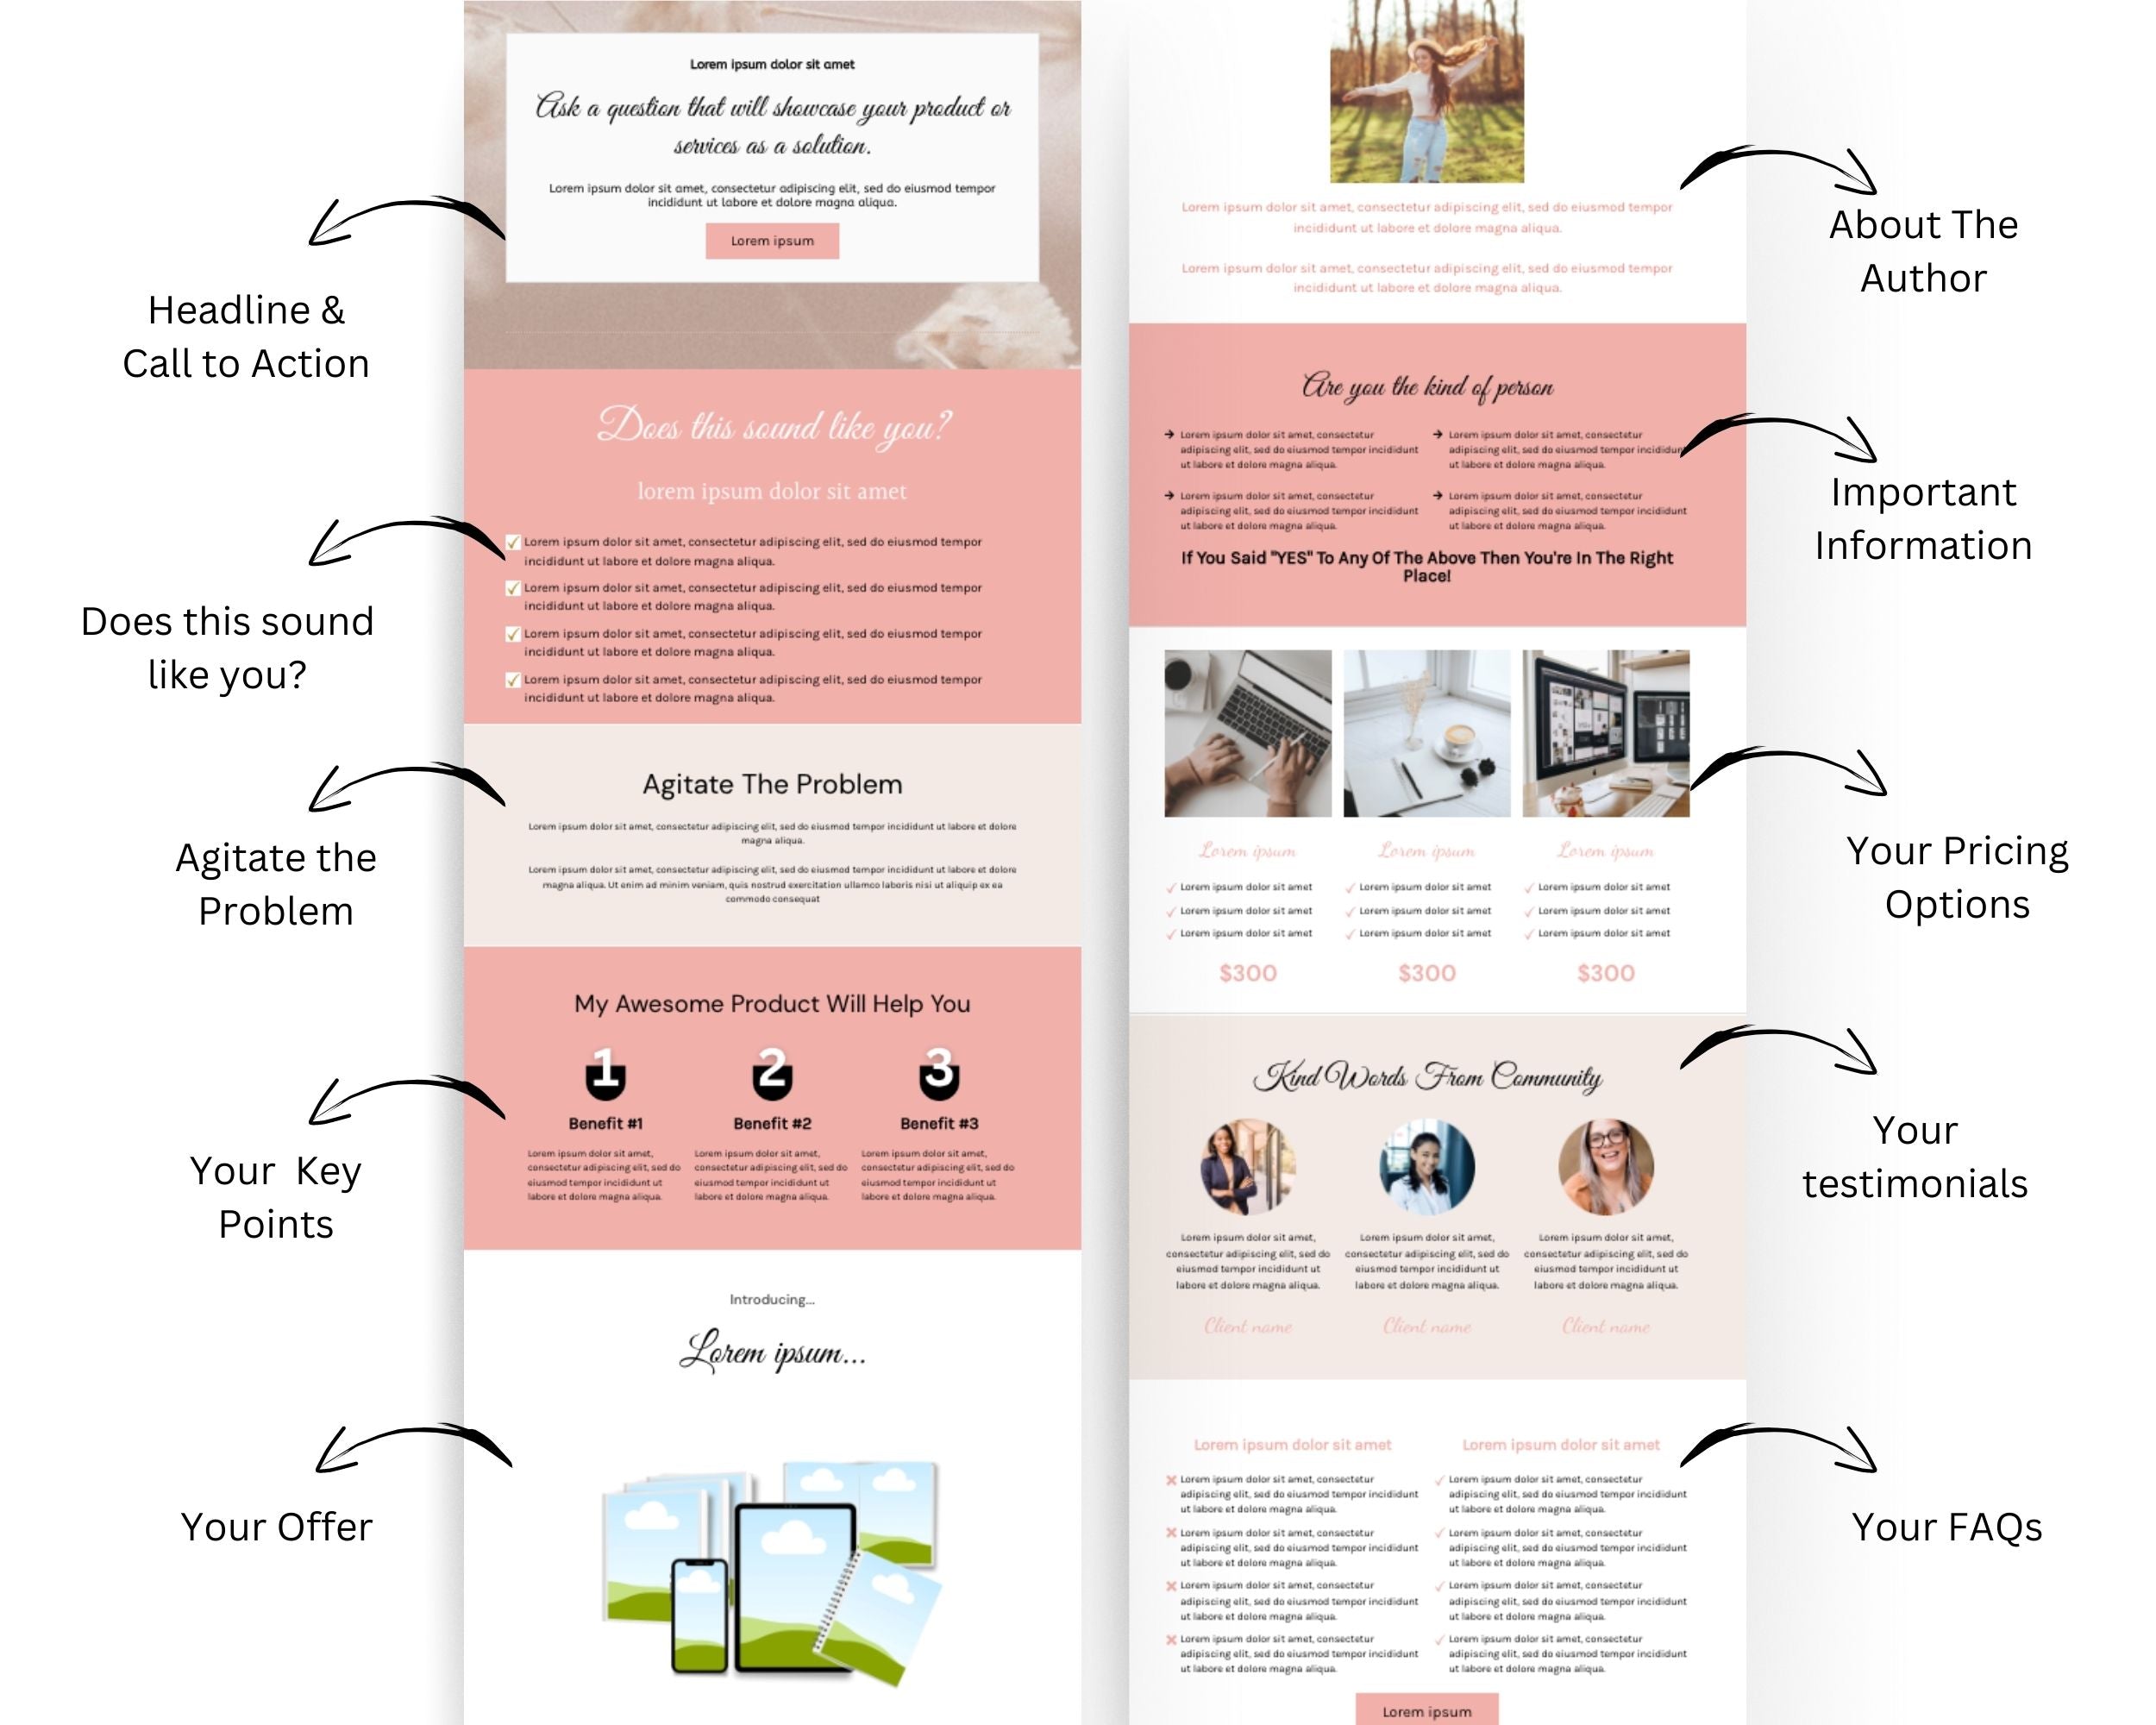 Spring Blossom Sales Page Template in ThriveCart